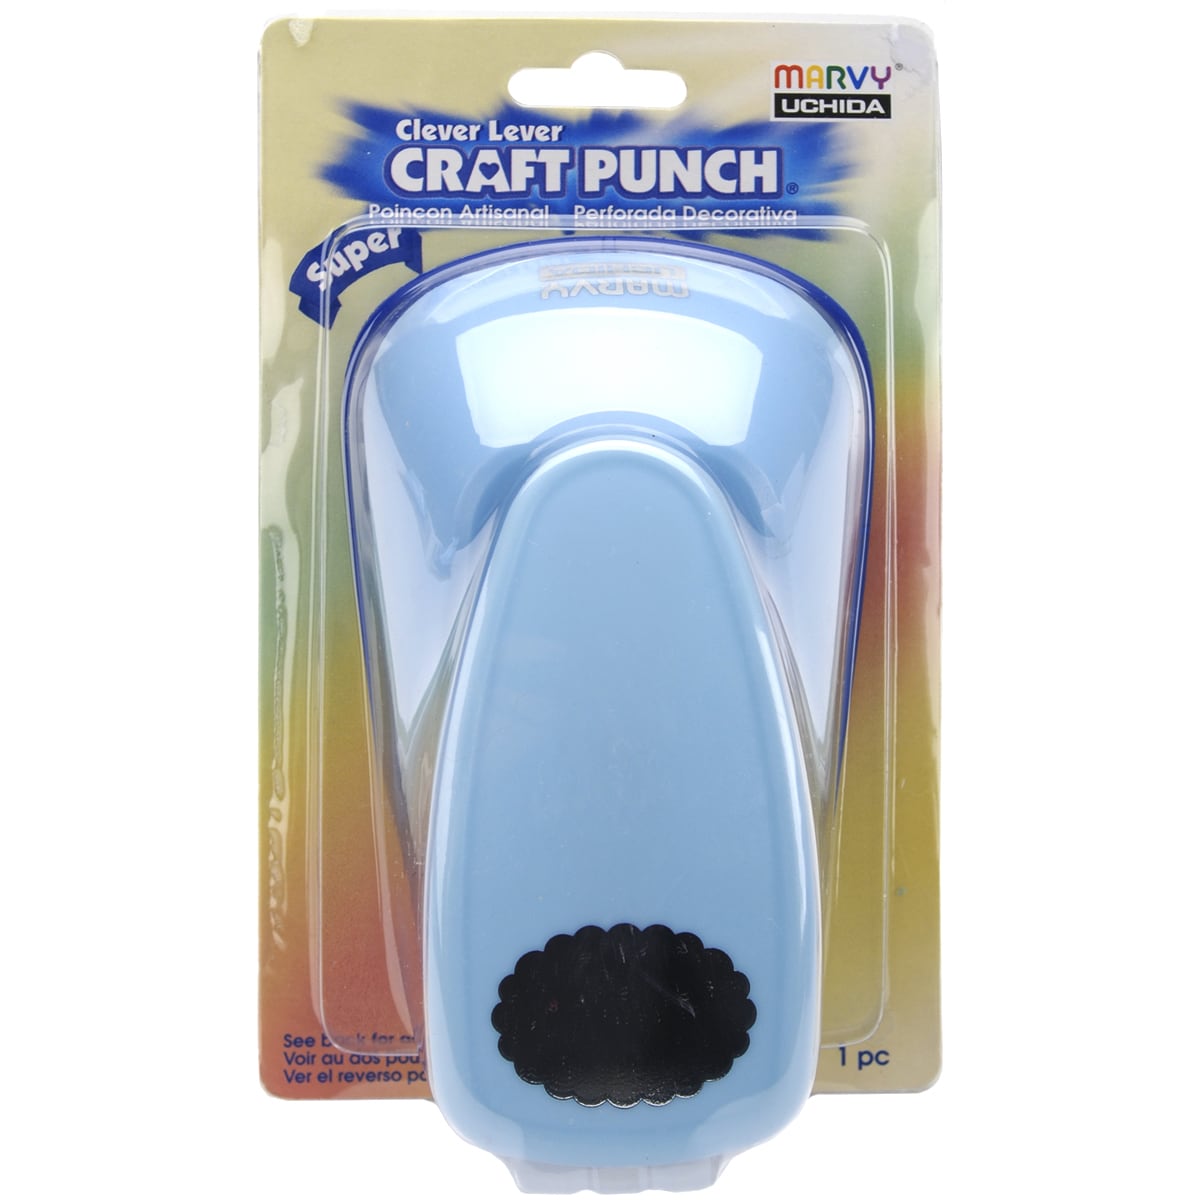 Clever Lever Craft Punch Super Jumbo